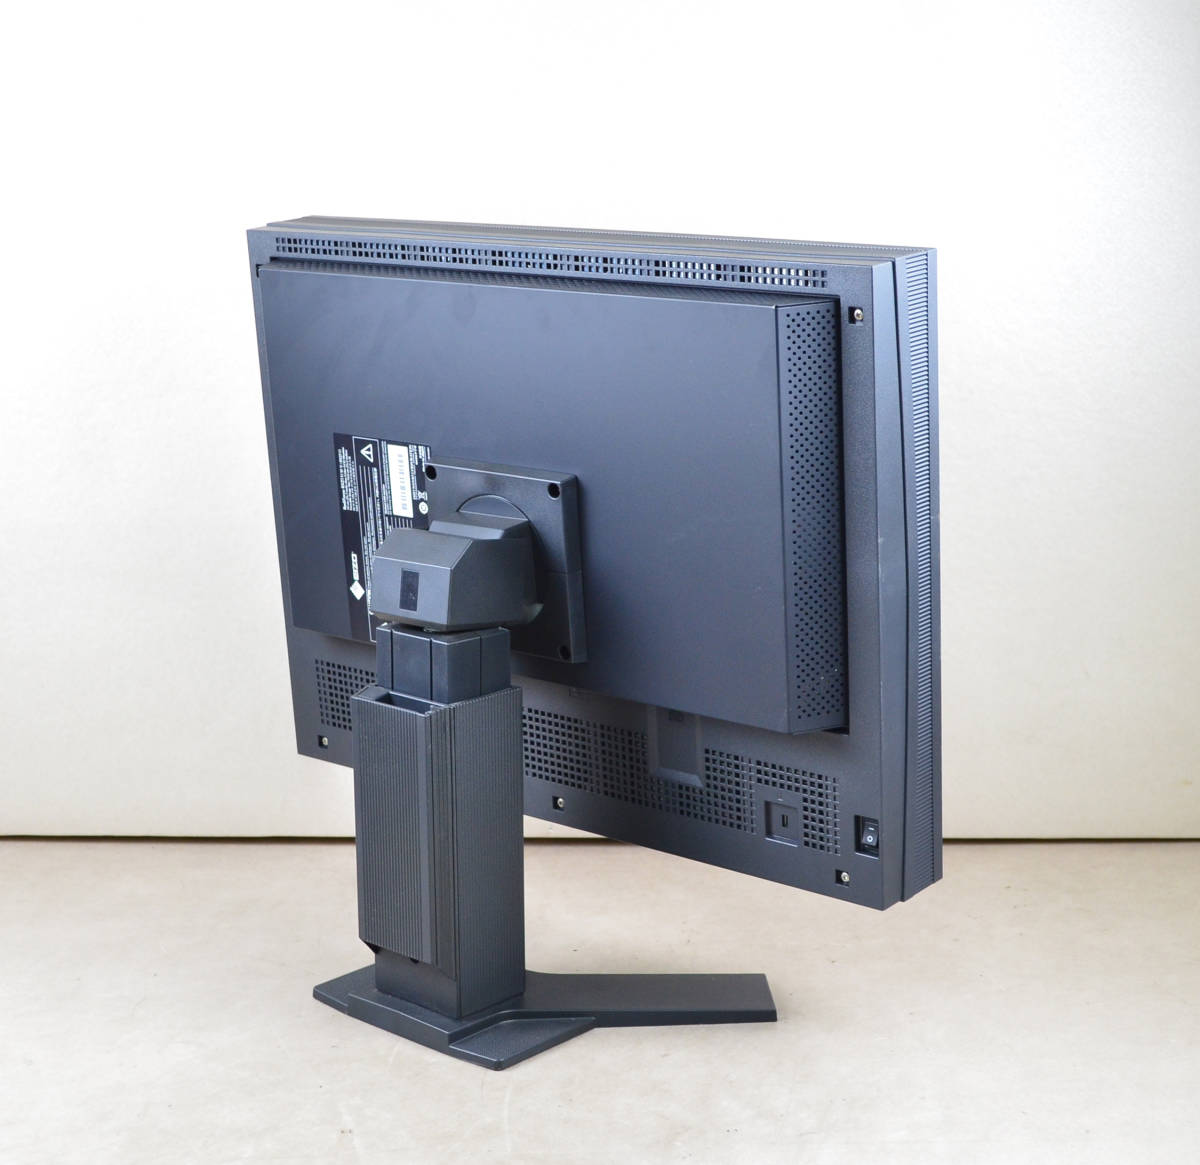 4115. for image display monitor EIZO RX211 21.3 wide going up and down * rotation * vertical display display 